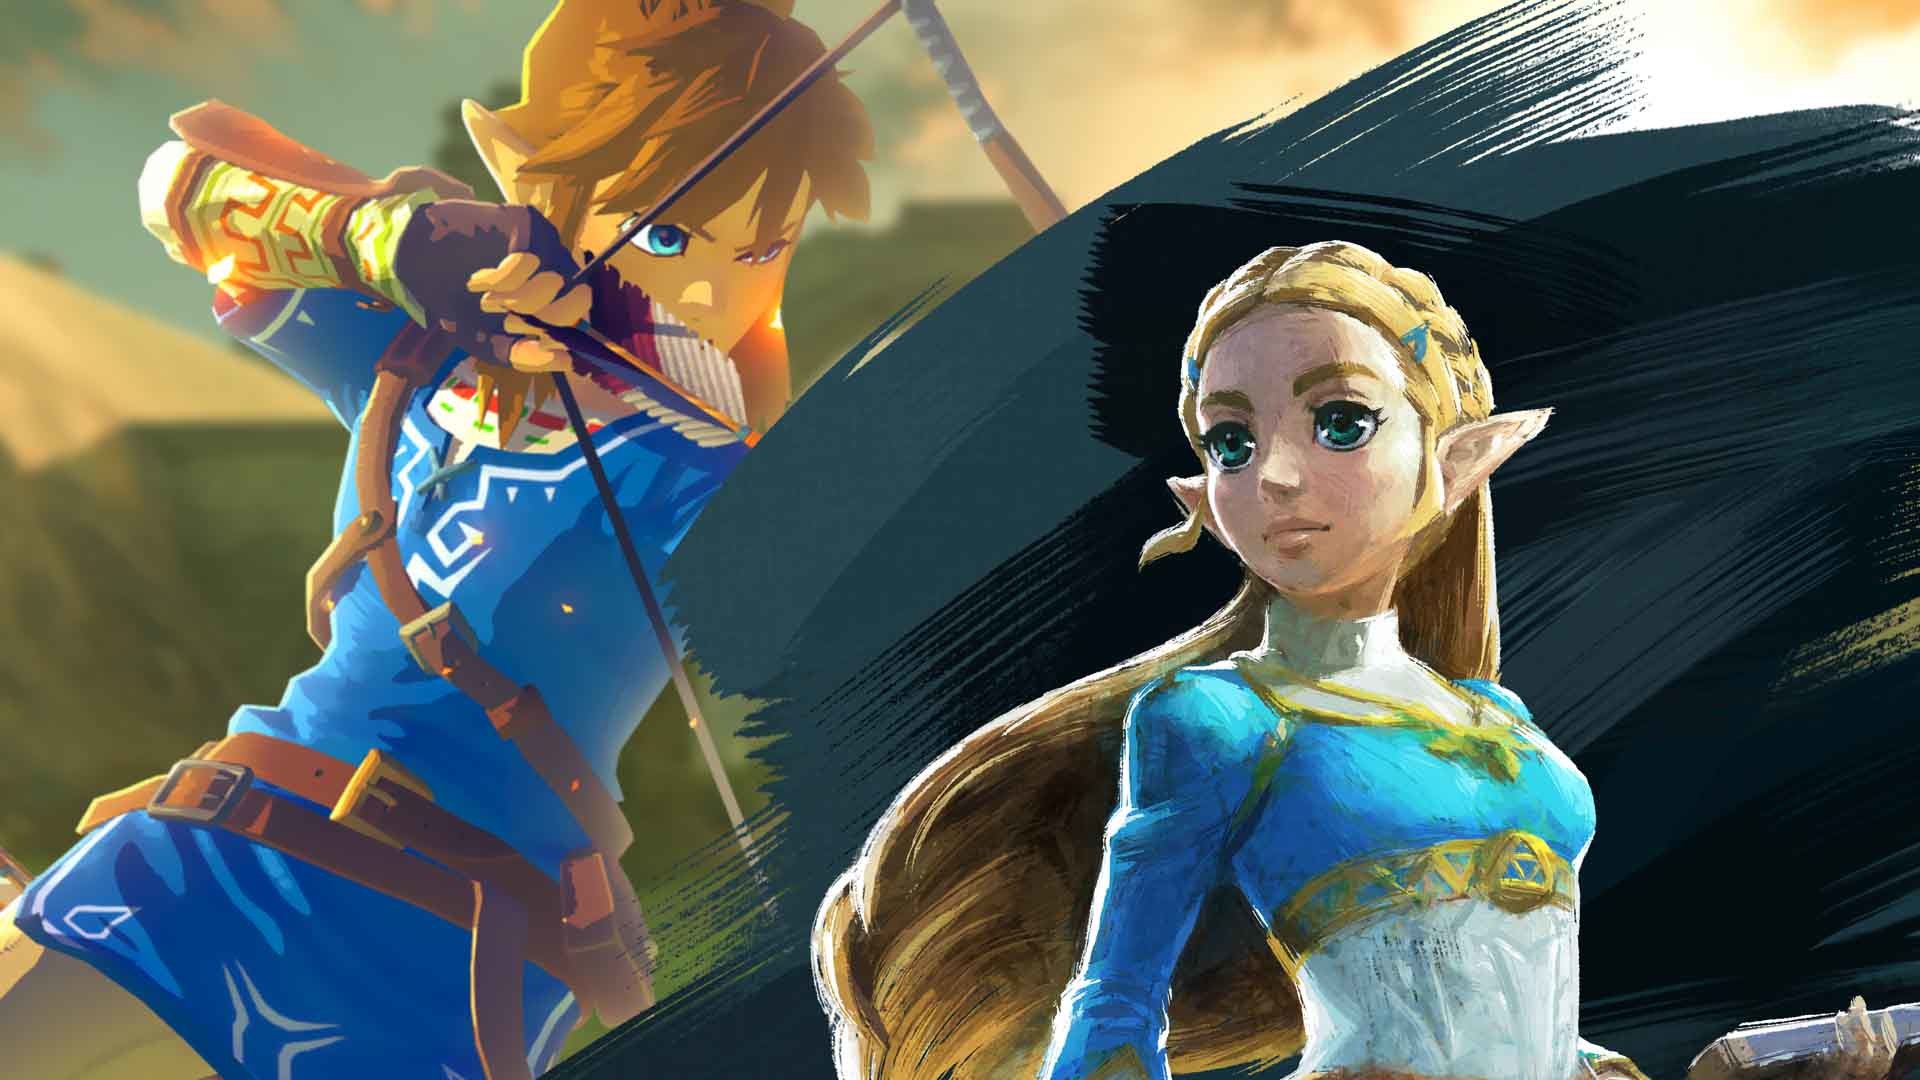 1920x1080 Get free high quality HD wallpapers zelda live wallpaper iphone